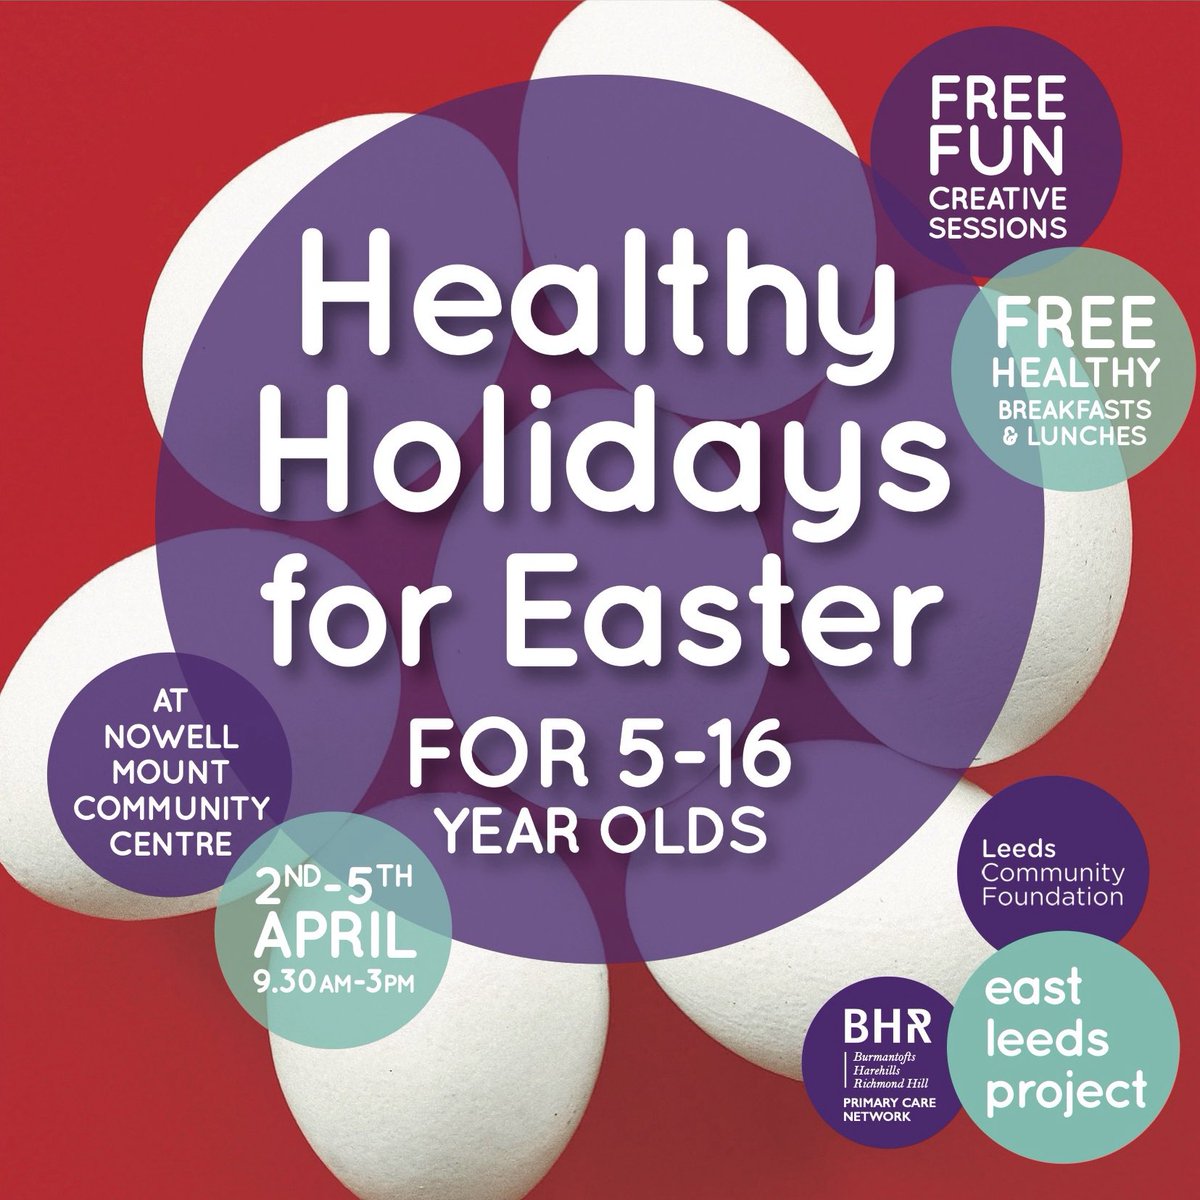 Egg-cellent news! #HealthyHolidays returns to Nowell Mount Community Centre in #Harehills from tomorrow!